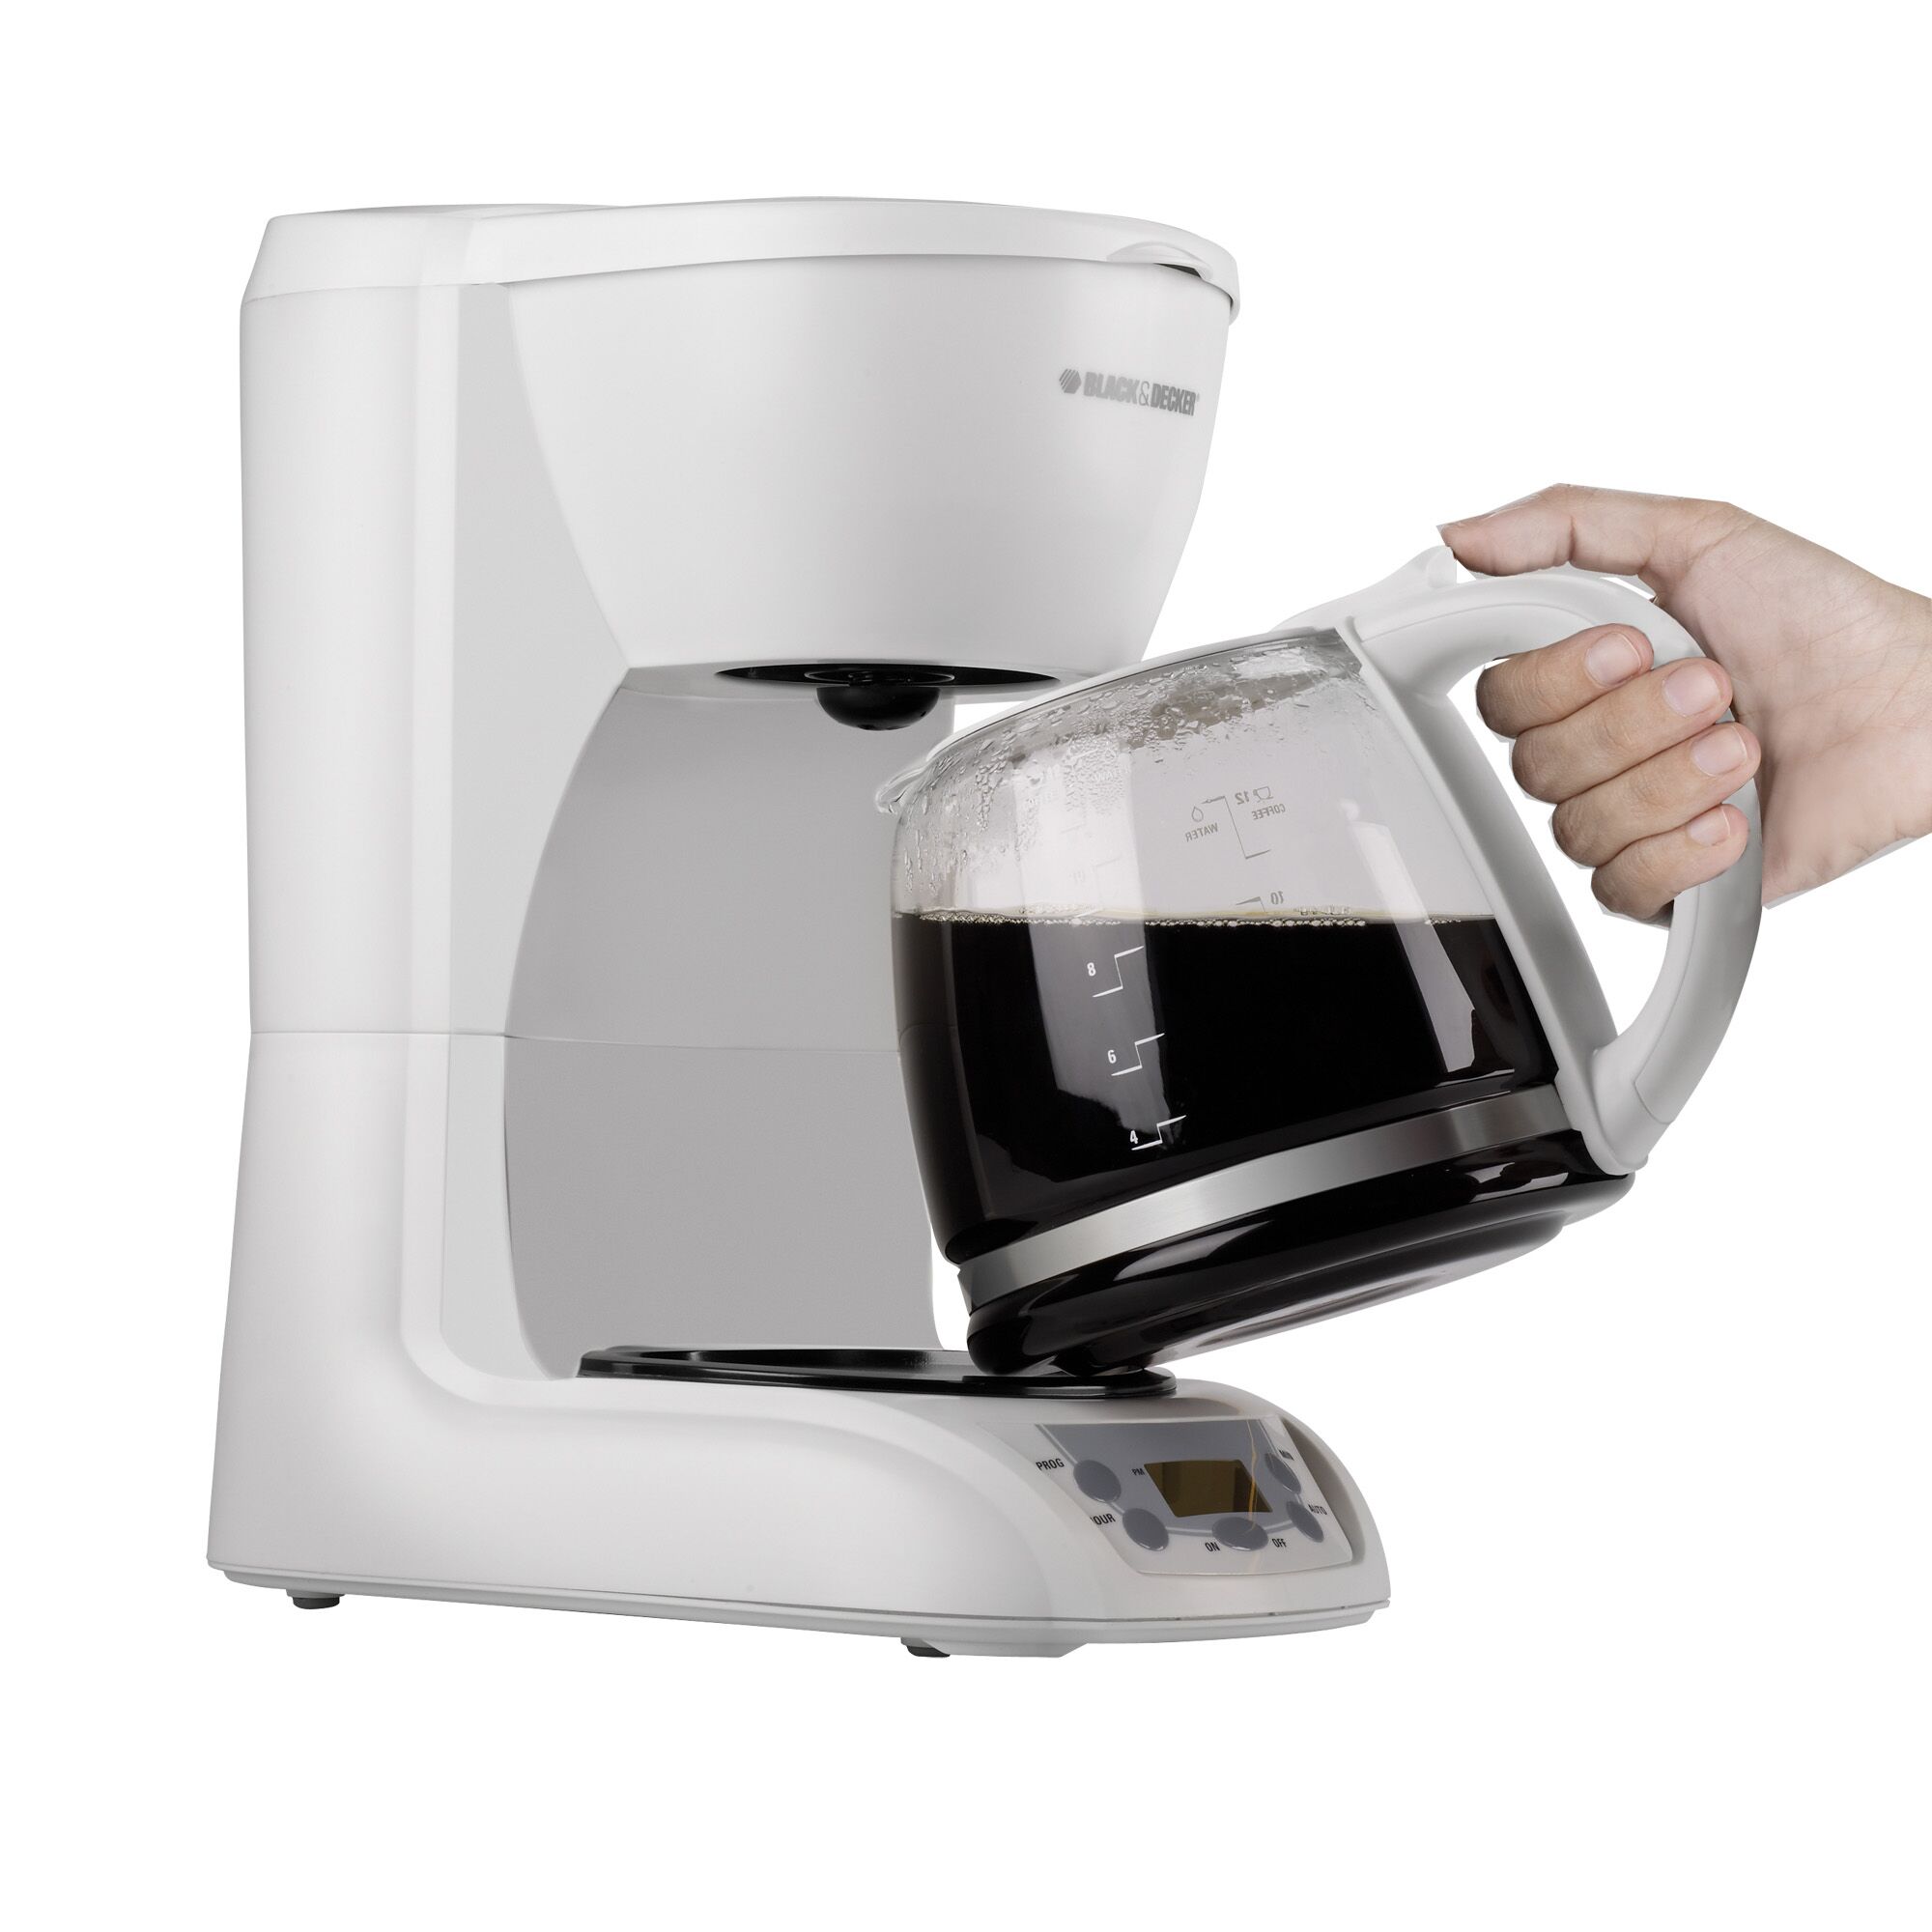 Profile of 12 cup programmable coffee maker.